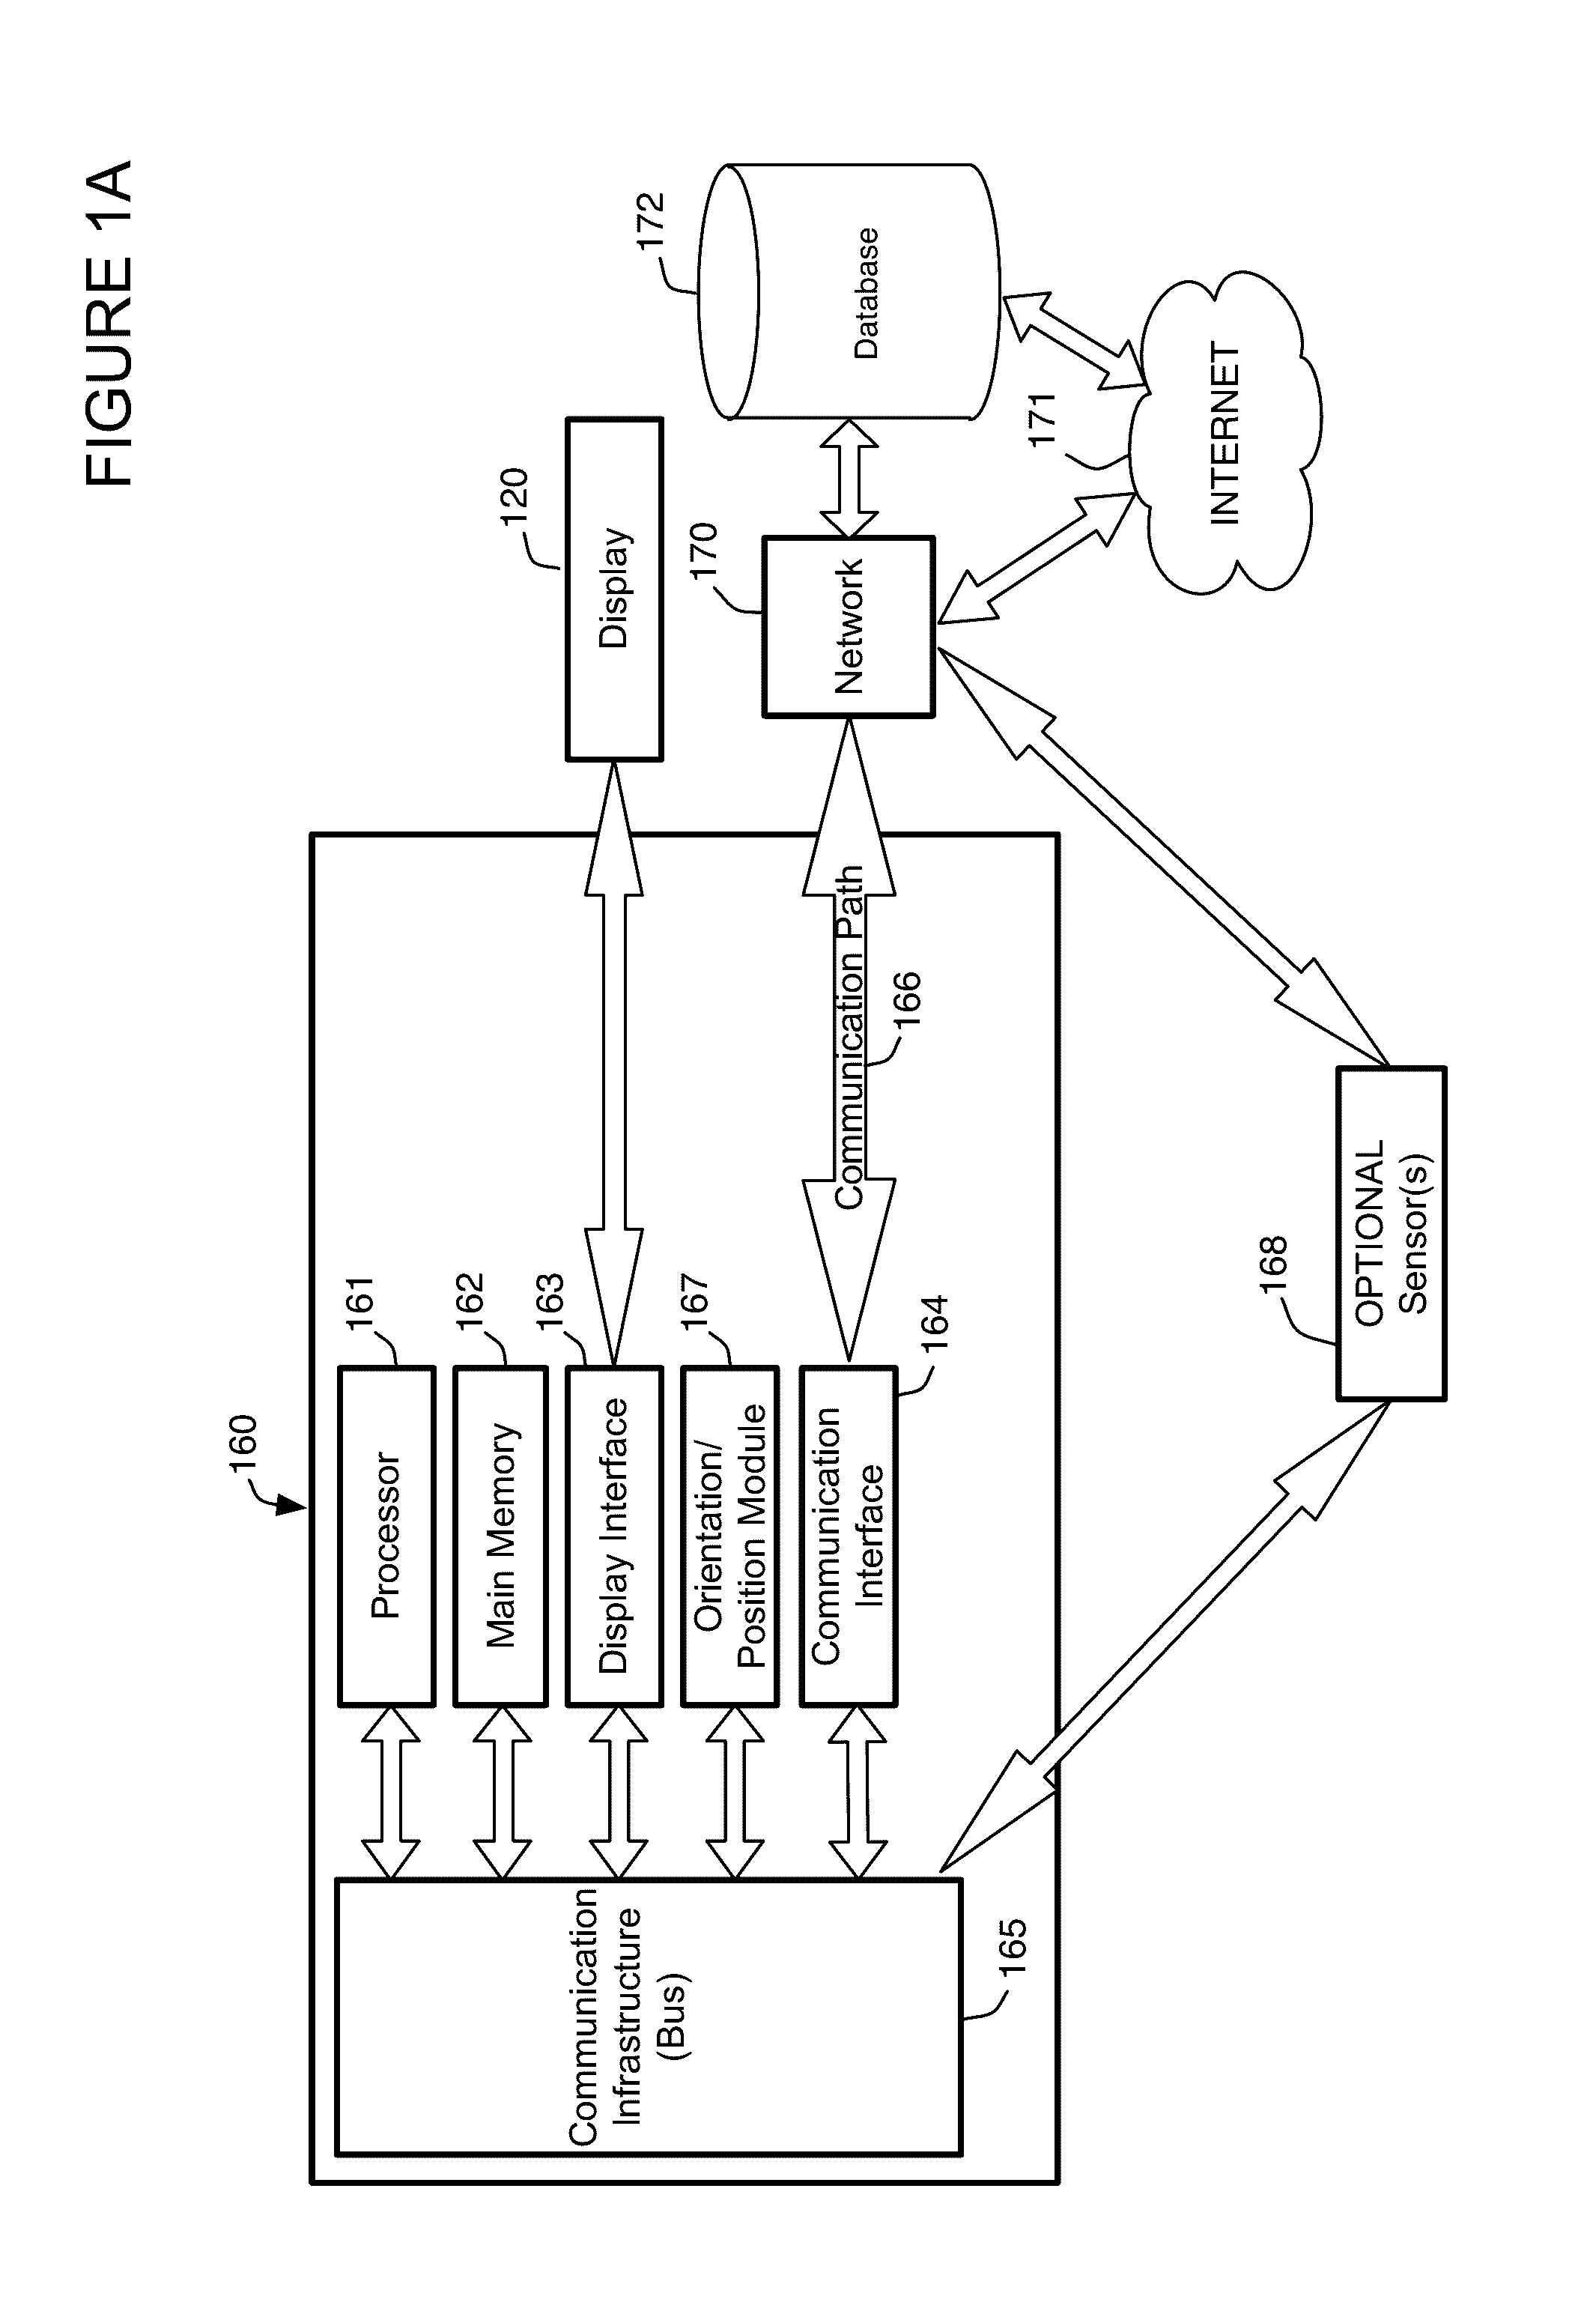 Sensor and media event detection and tagging system